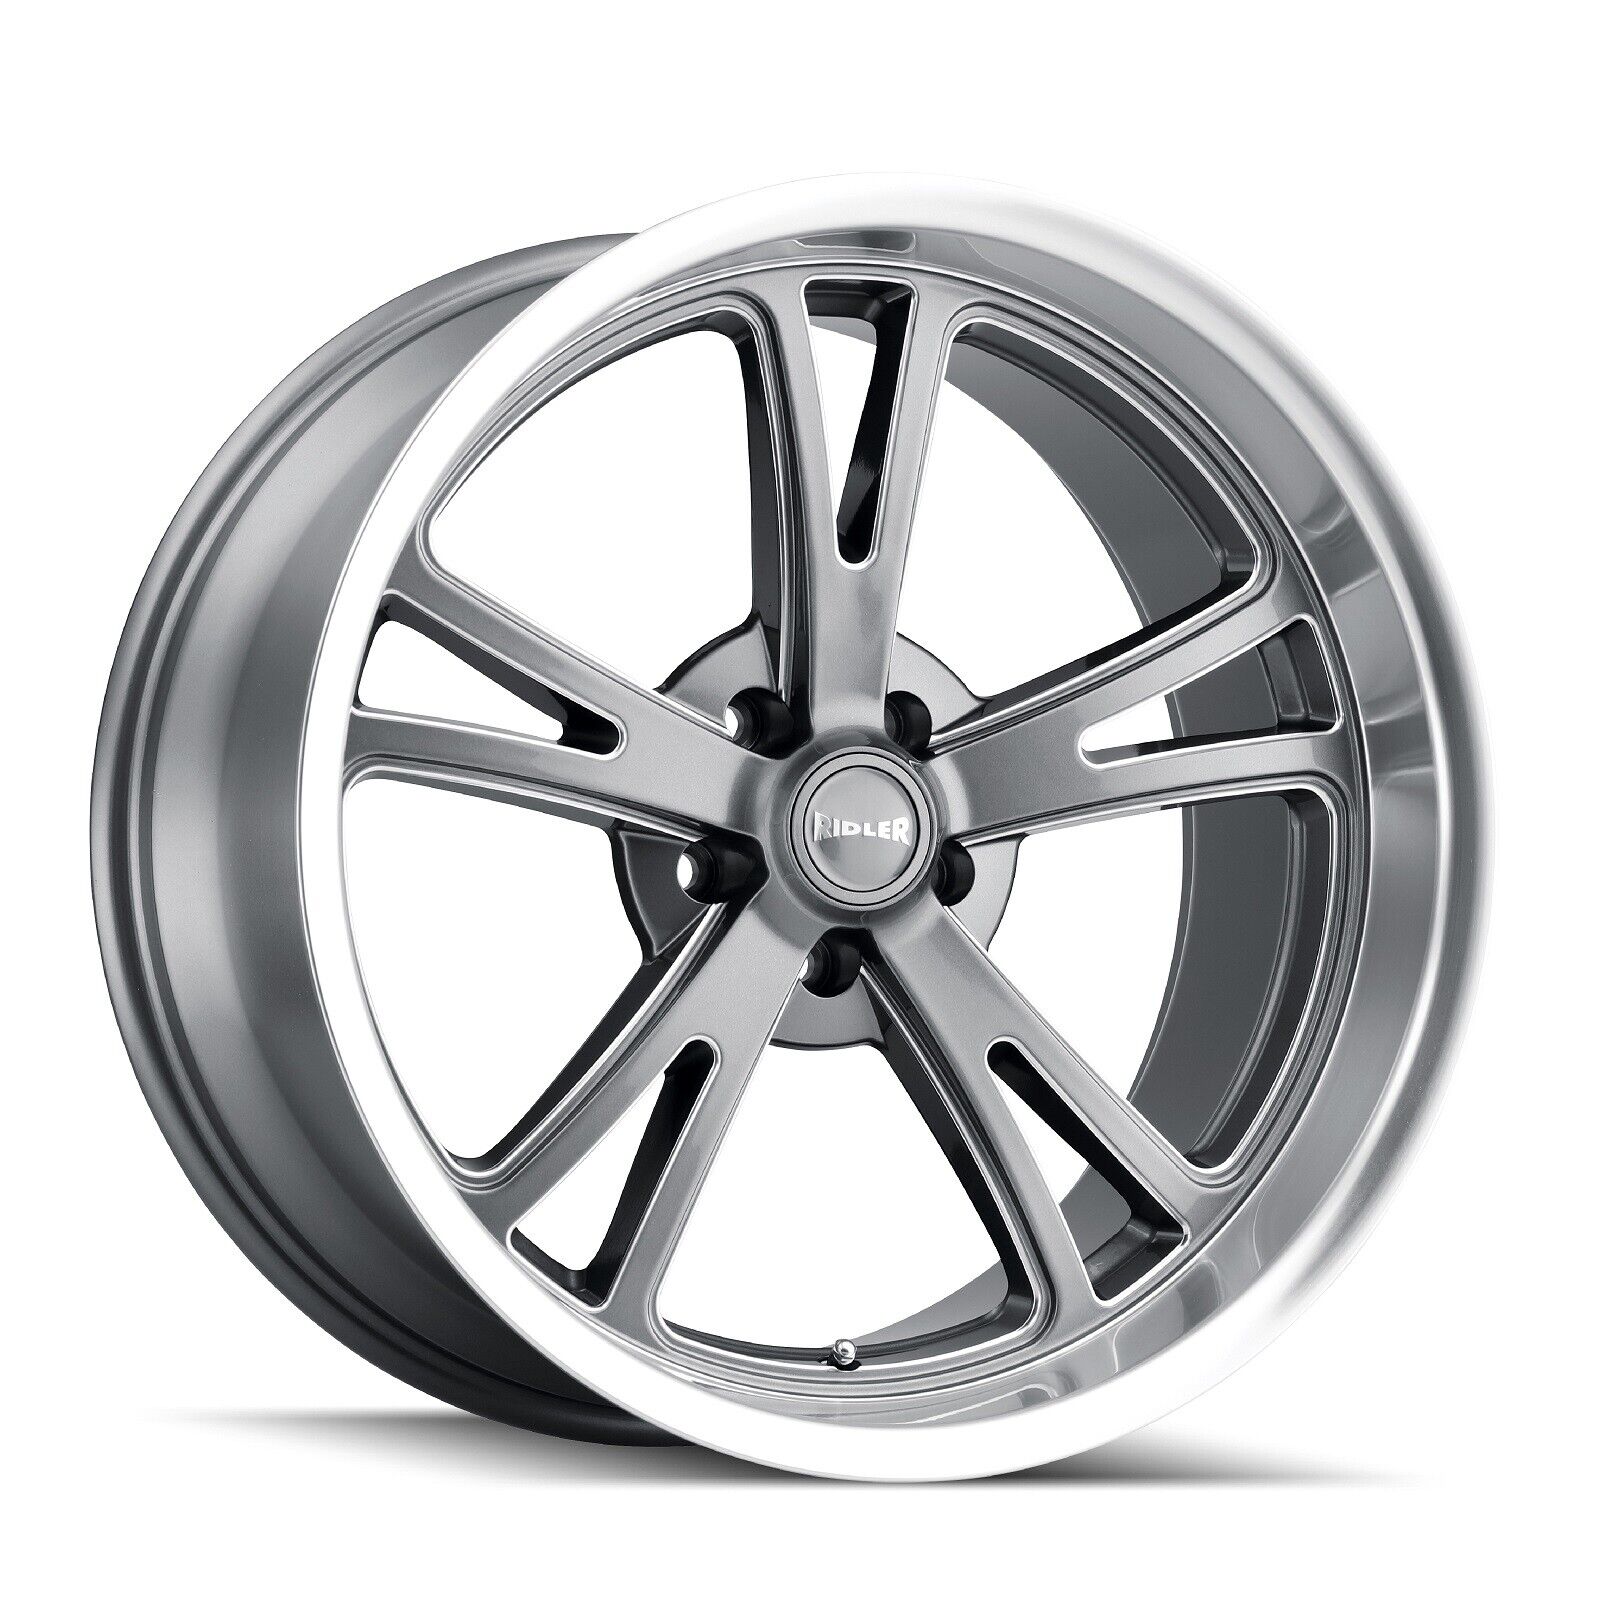 CPP Ridler 606 wheels 17x7 fits: CHEVY IMPALA CHEVELLE SS